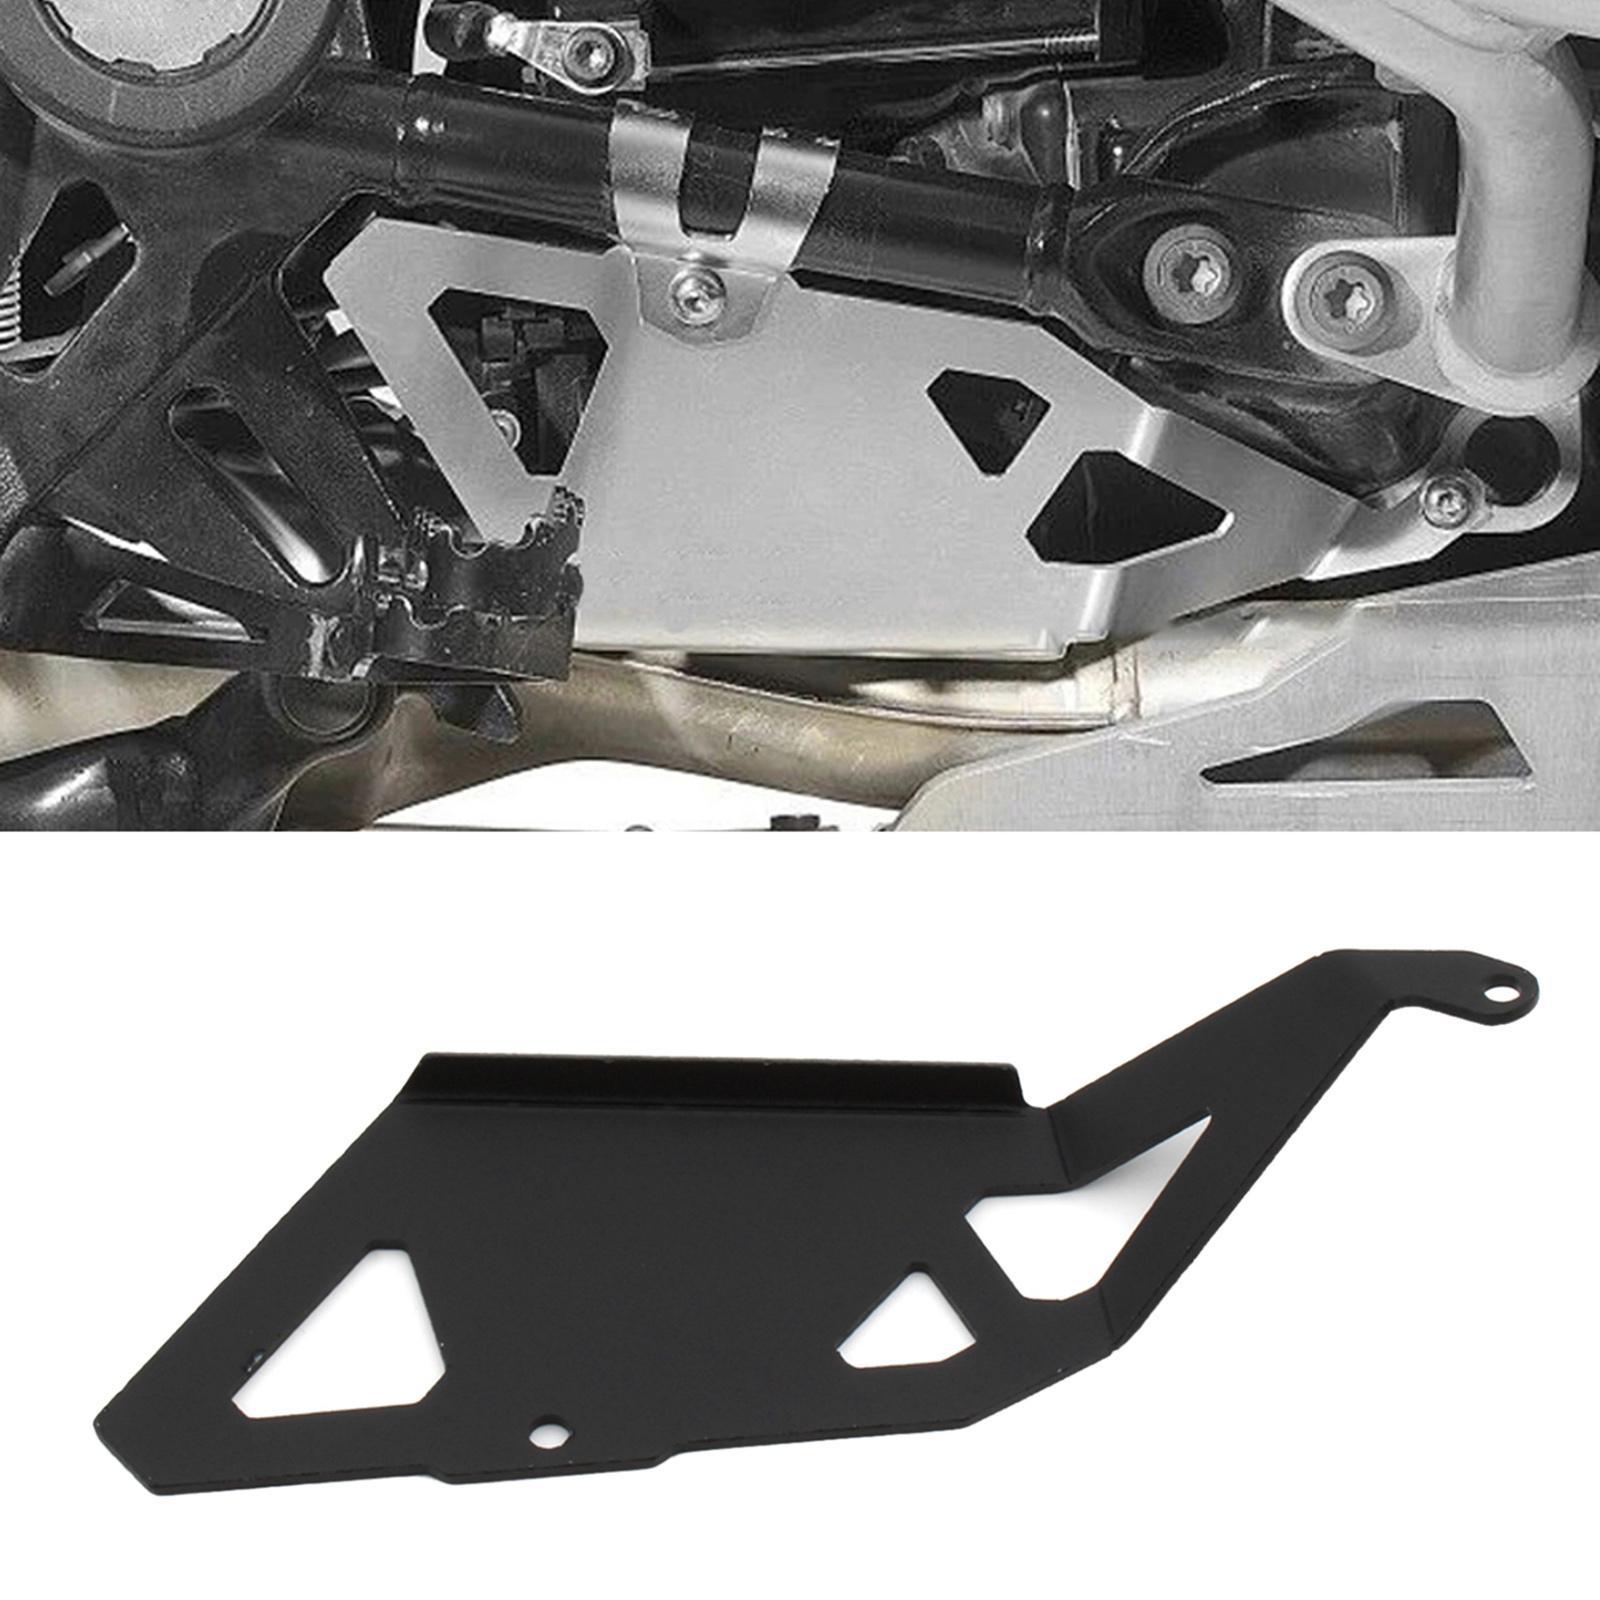 Protector Guard Cover Motorcycle Parts Aluminum Alloy Fit for  R1250GS Black